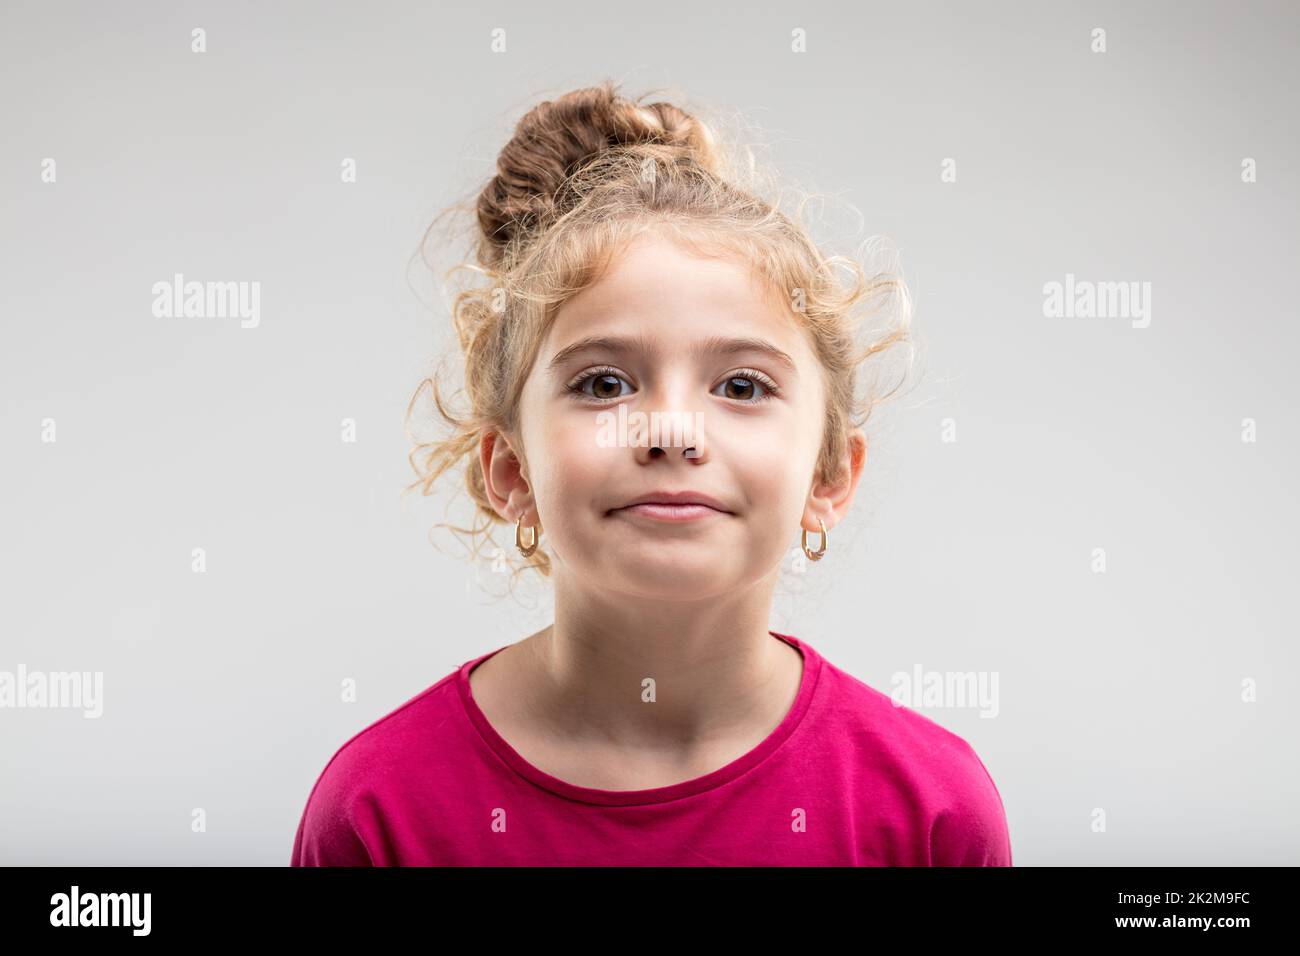 Portrait of young self-assured preteen girl Stock Photo